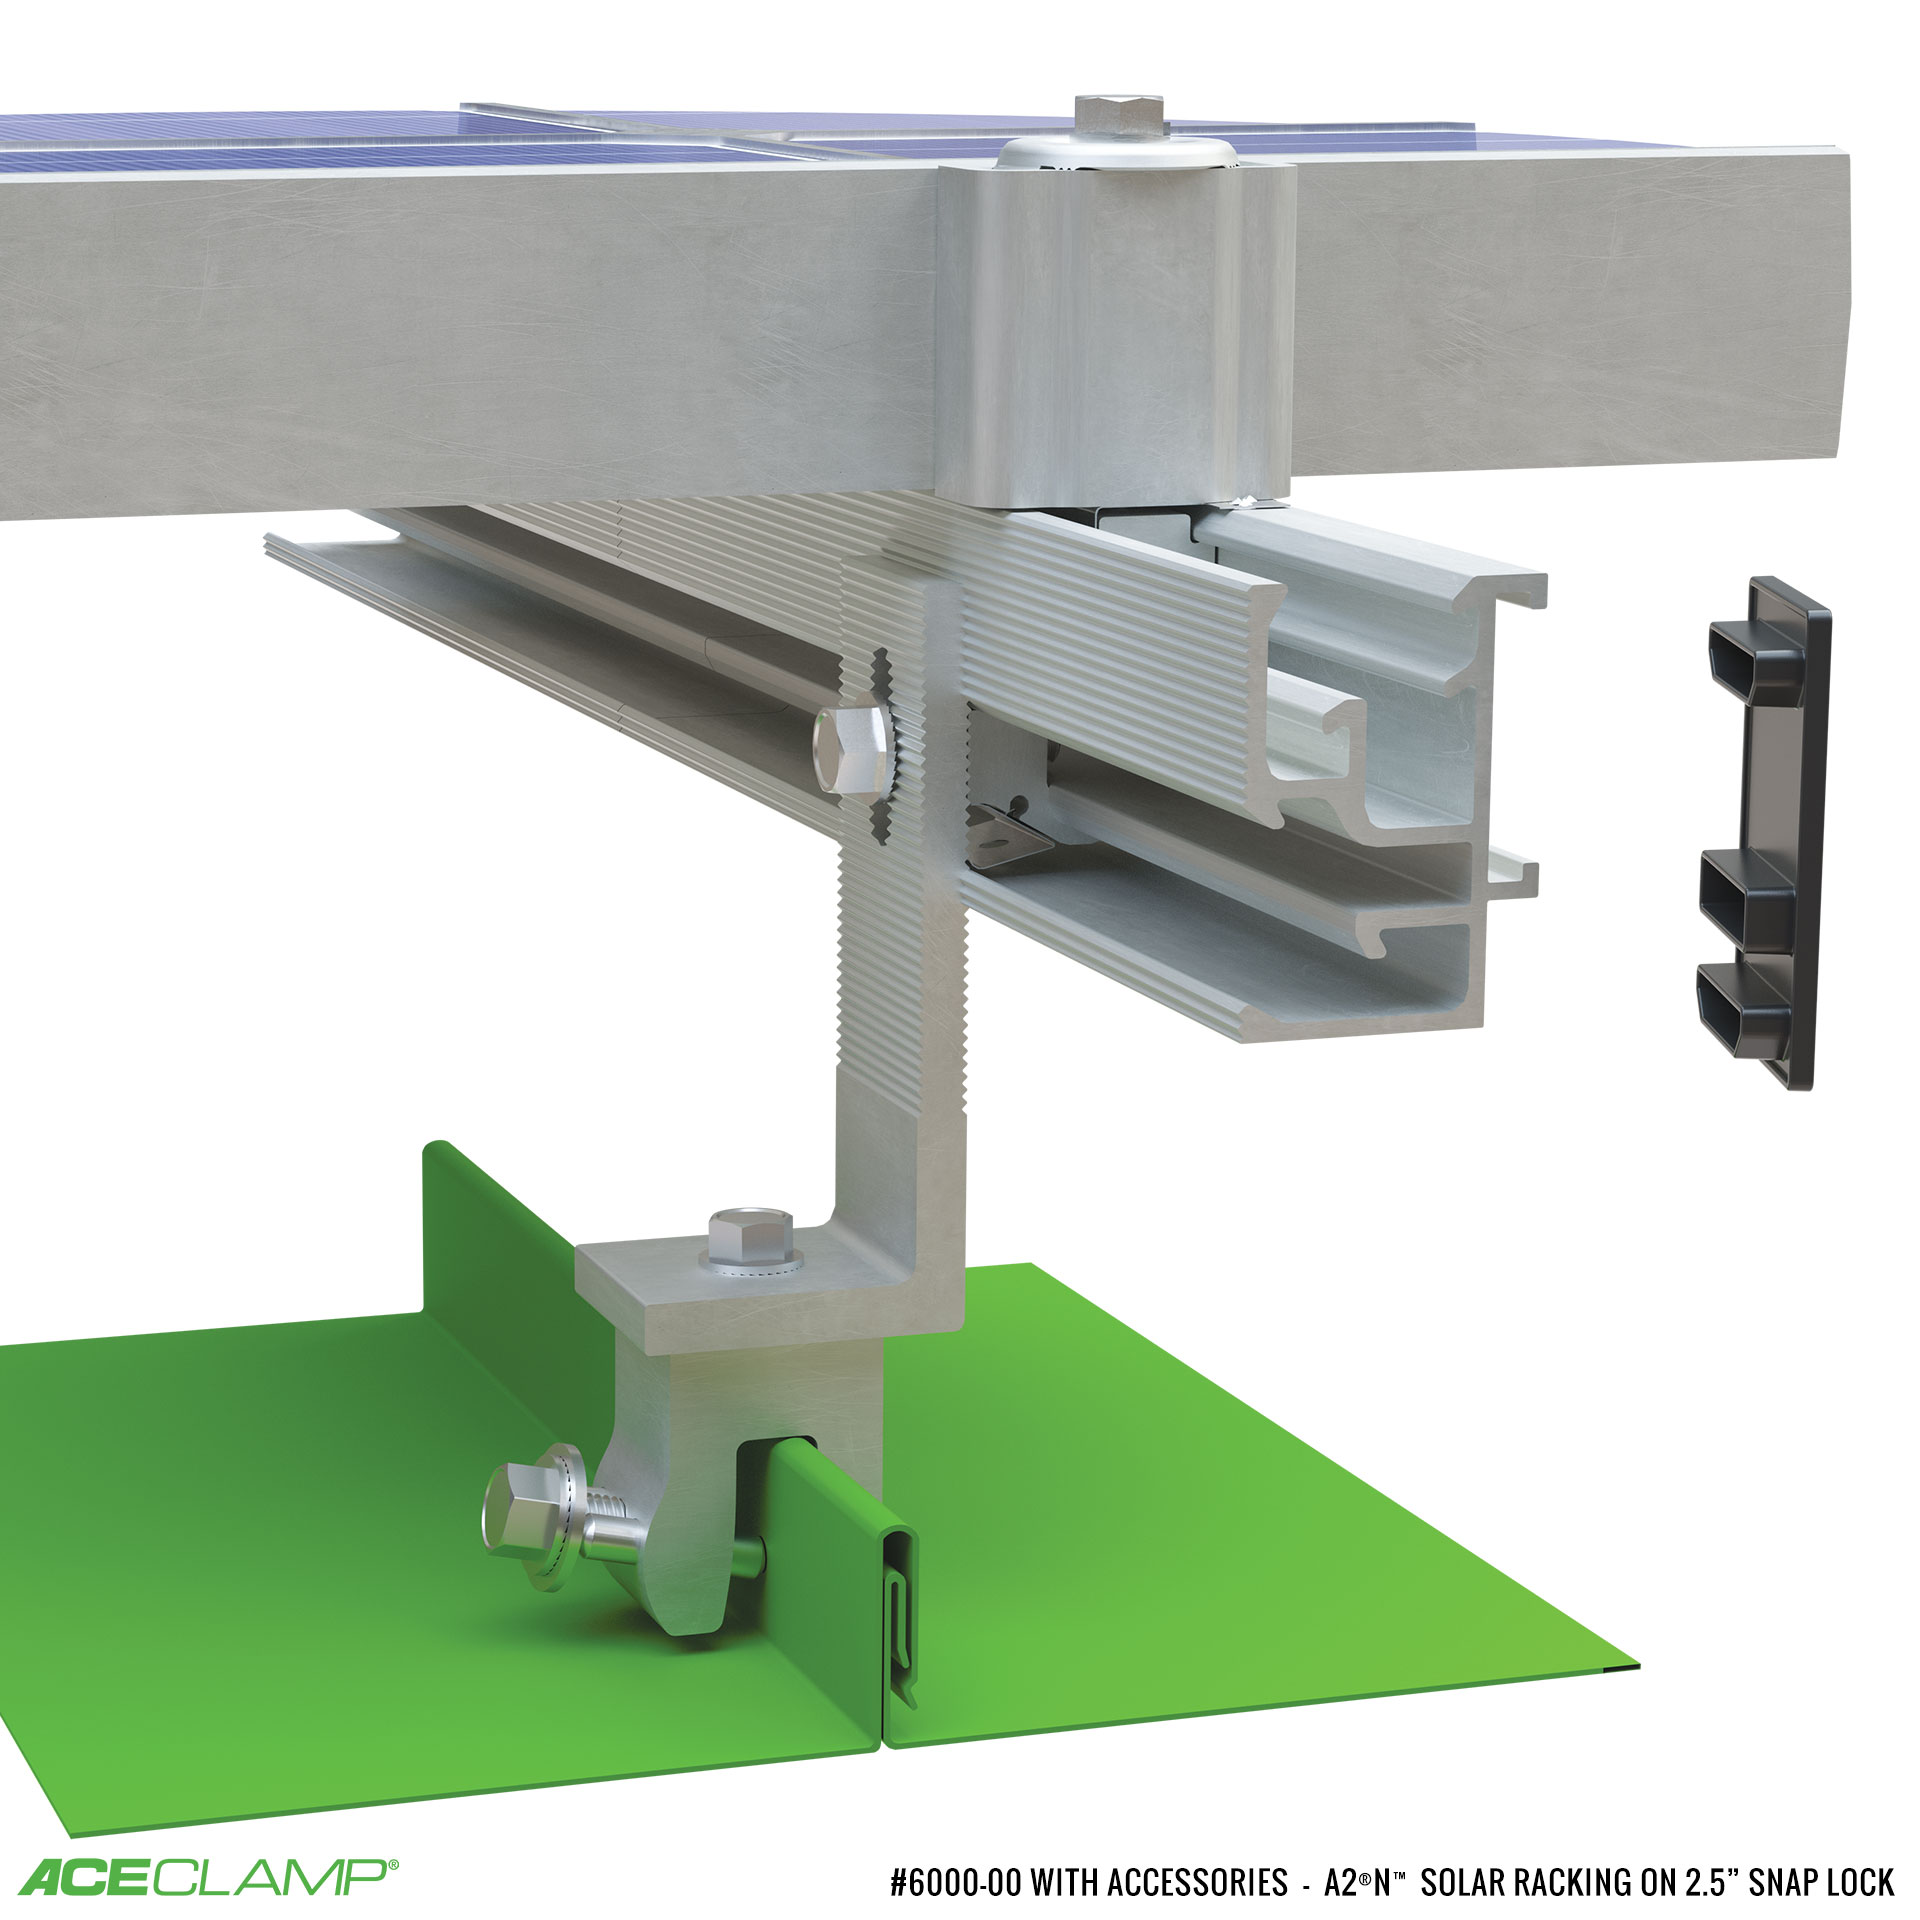 Solar Snap® System: Ideal for Snap Lock Standing Seam Metal Roofs